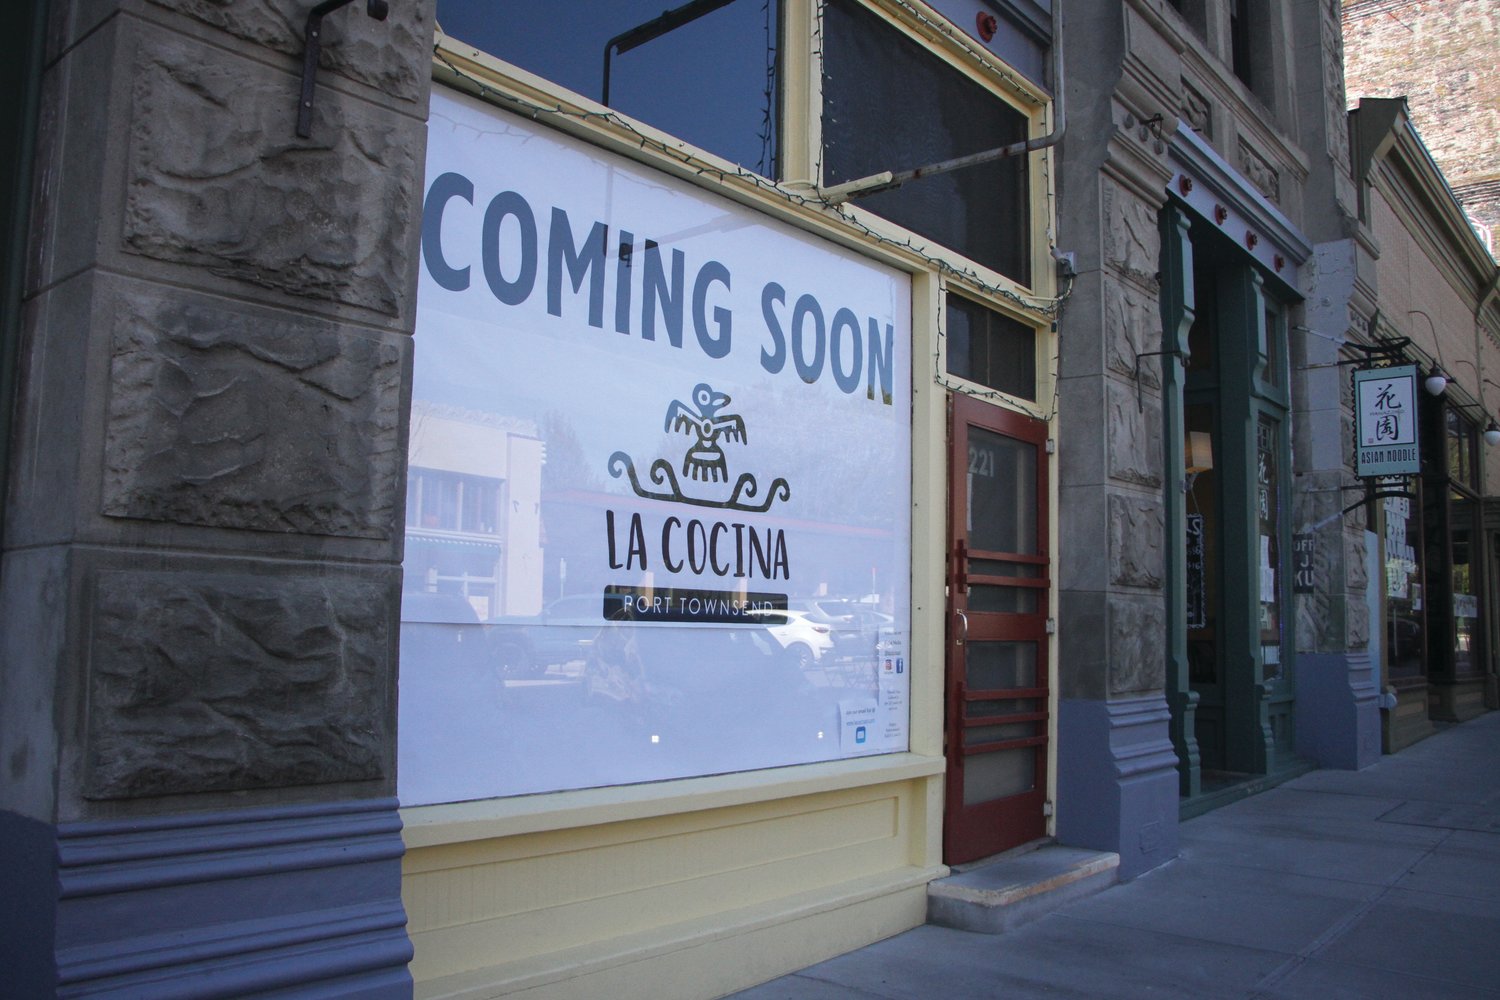 A Mexican-American cafe, La Cocina, will open this summer.